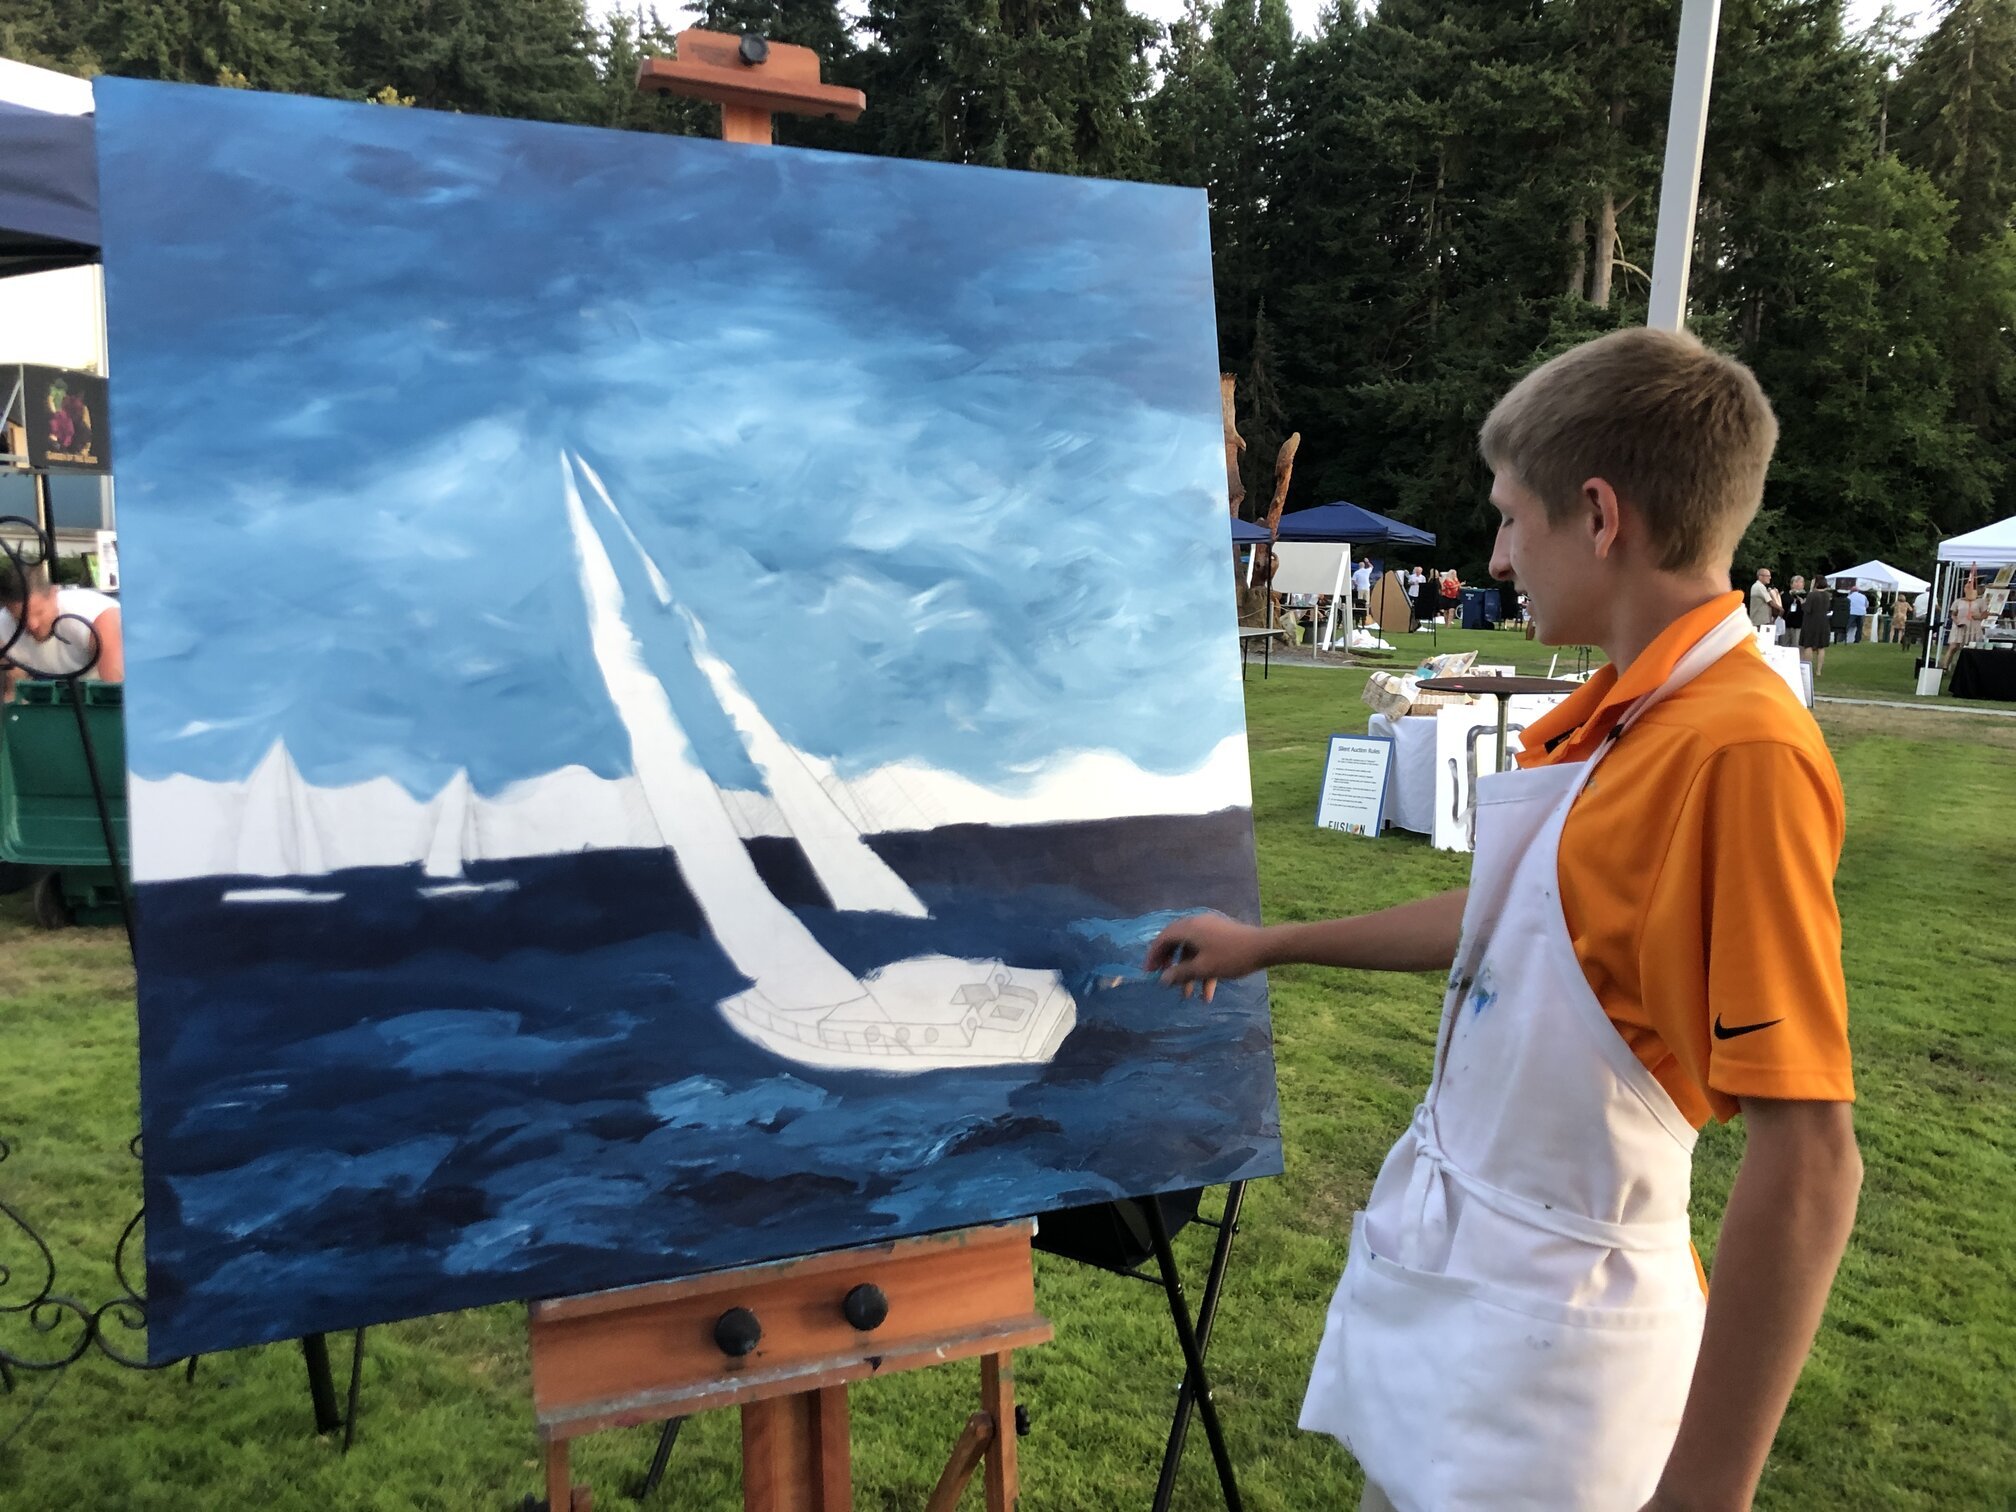 Aug 4 - FUSION Federal Way Summer Art Event